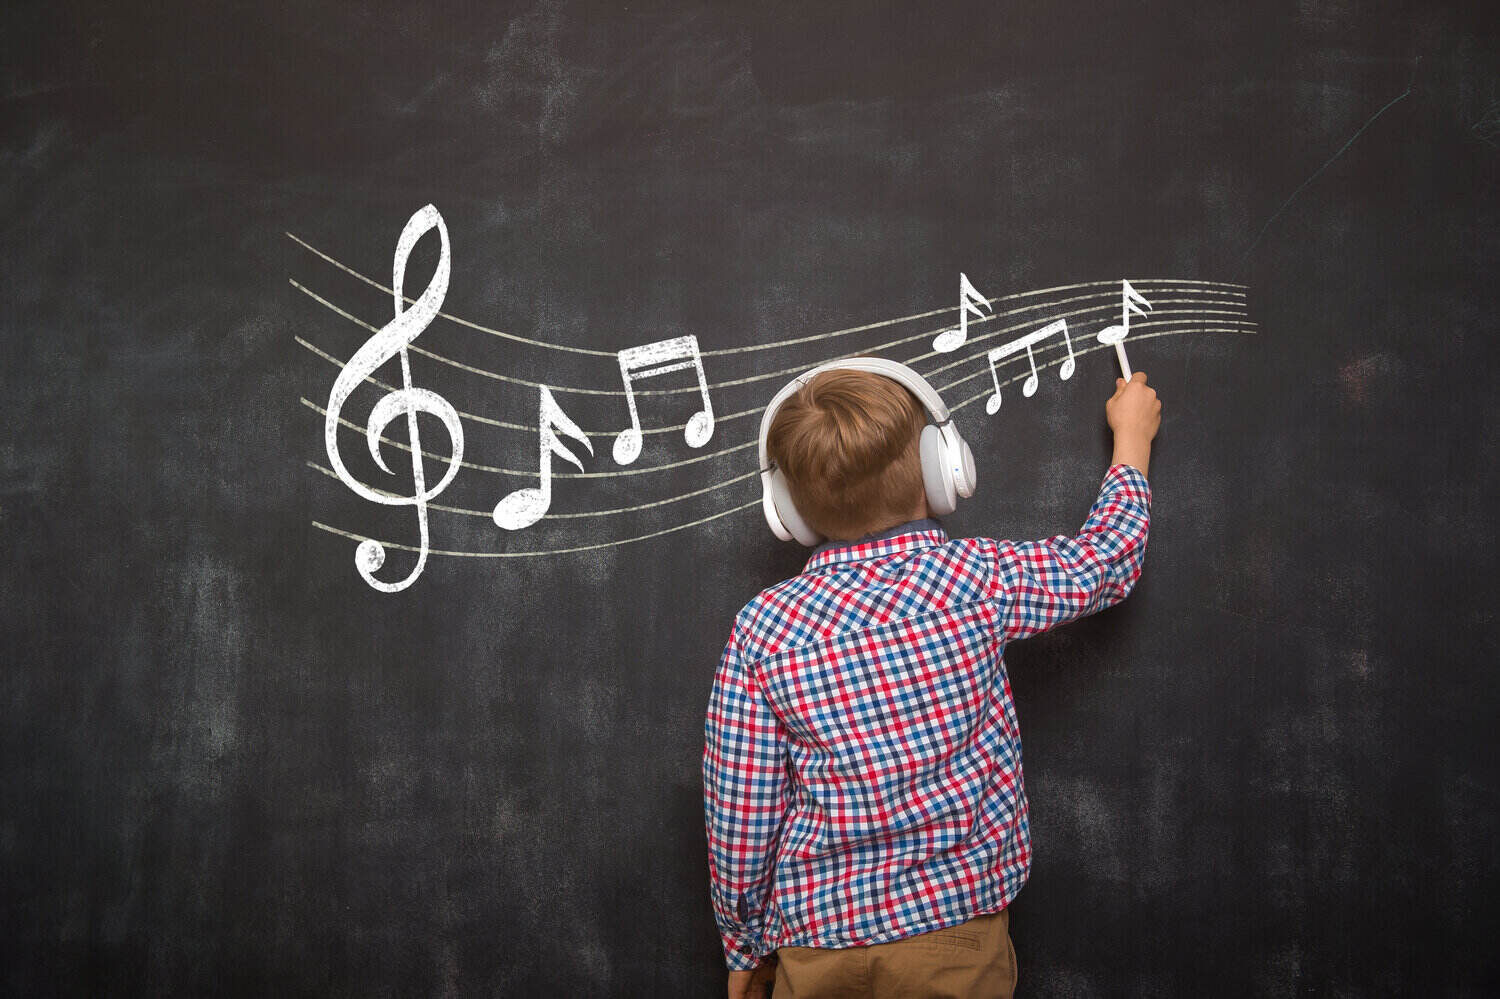 Boy with headphones on drawing music notes on a blackboard